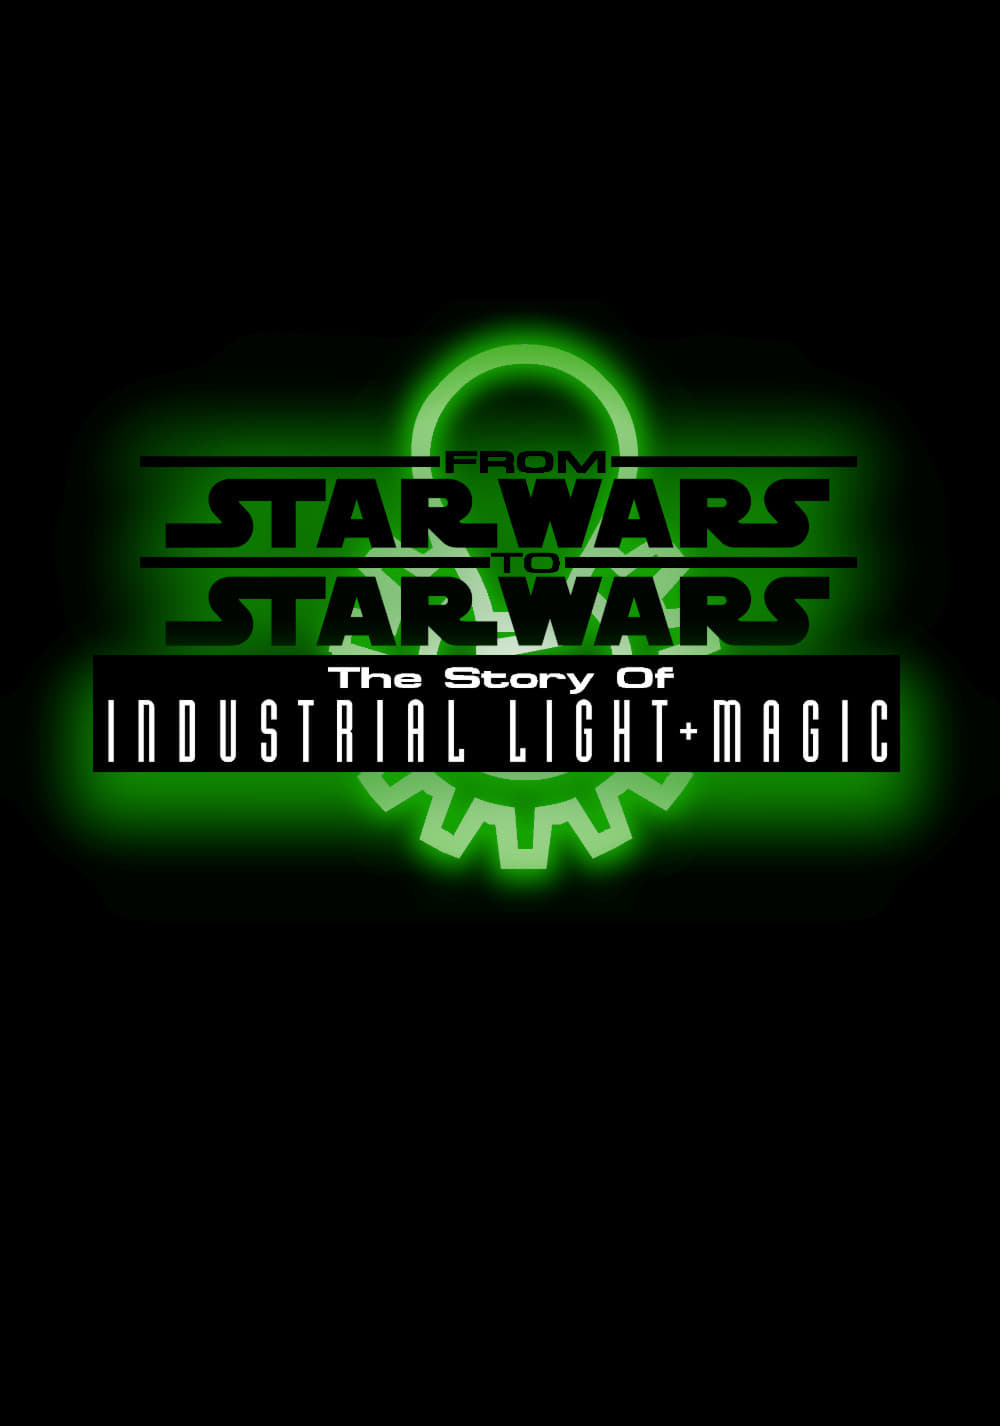 From Star Wars to Star Wars: The Story of Industrial Light & Magic (1999)